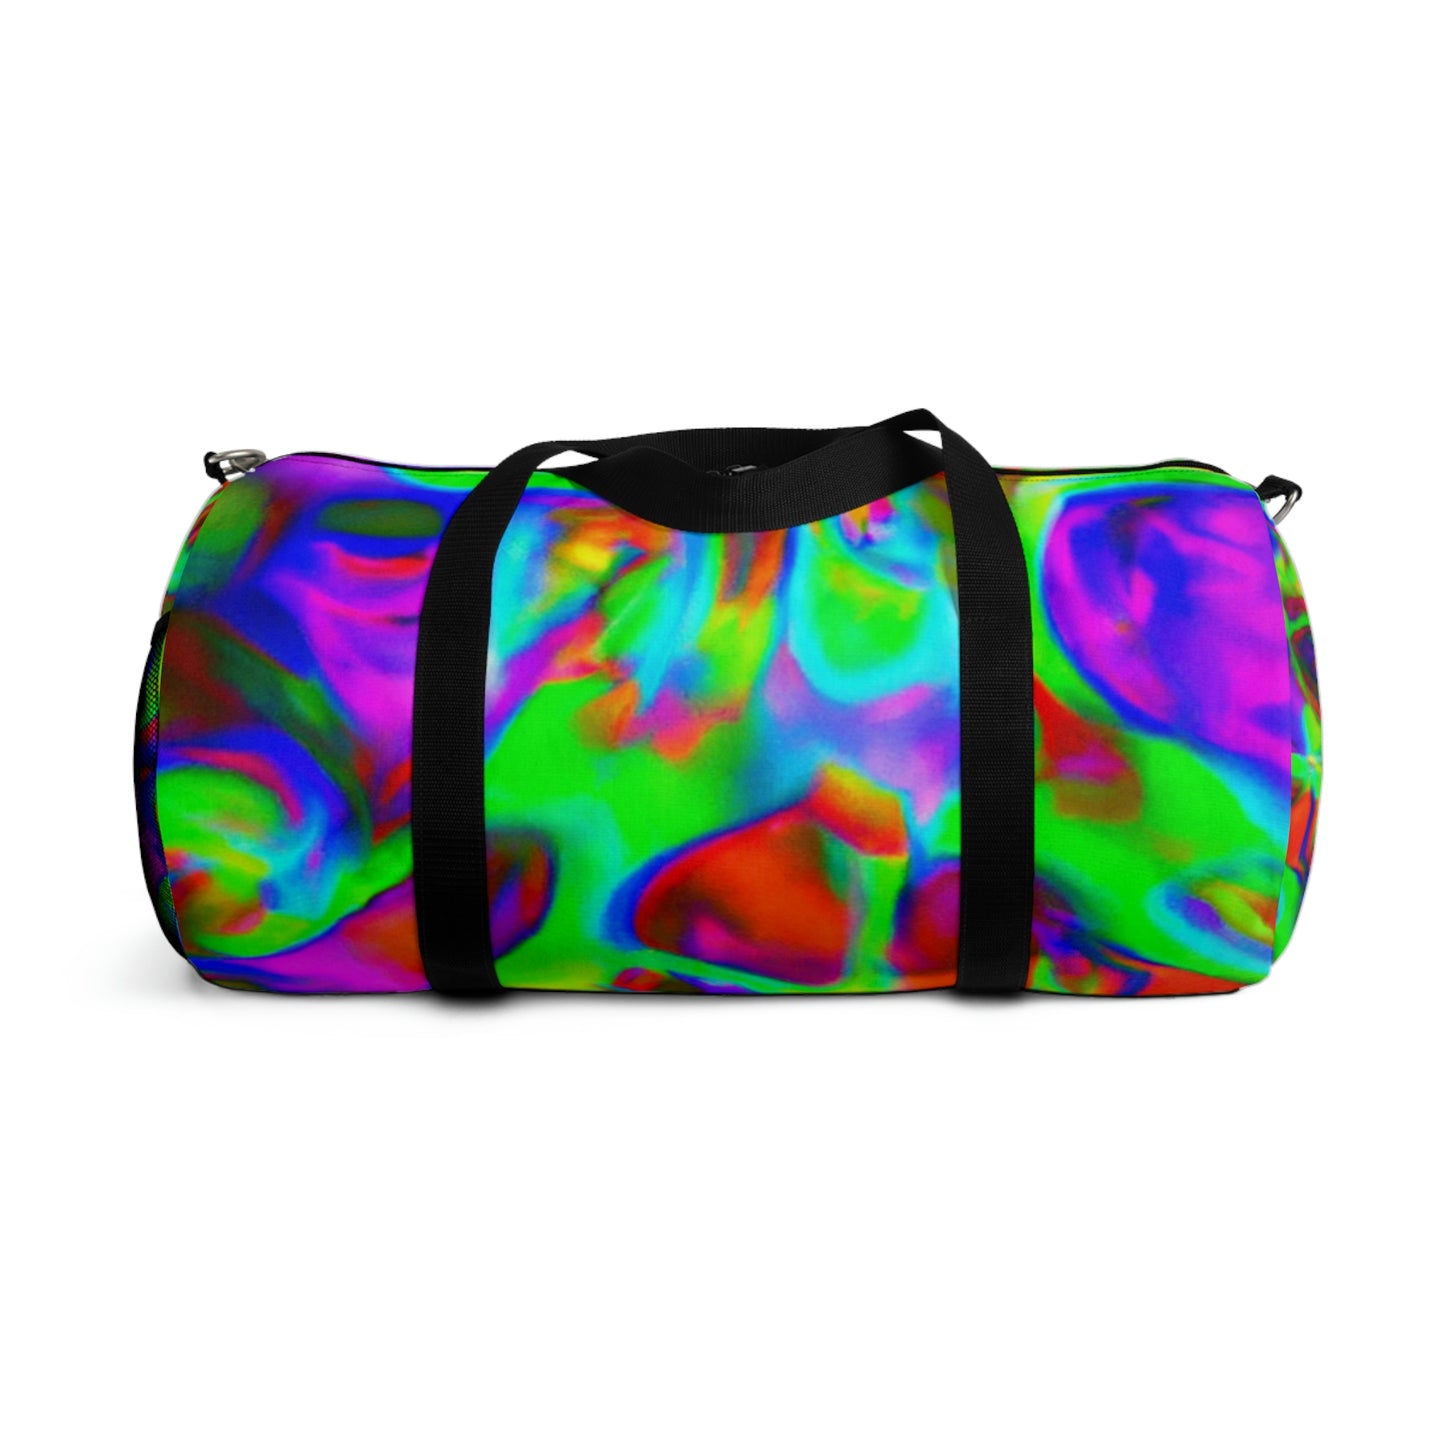 Winslowe Couture - Psychedelic Duffel Bag